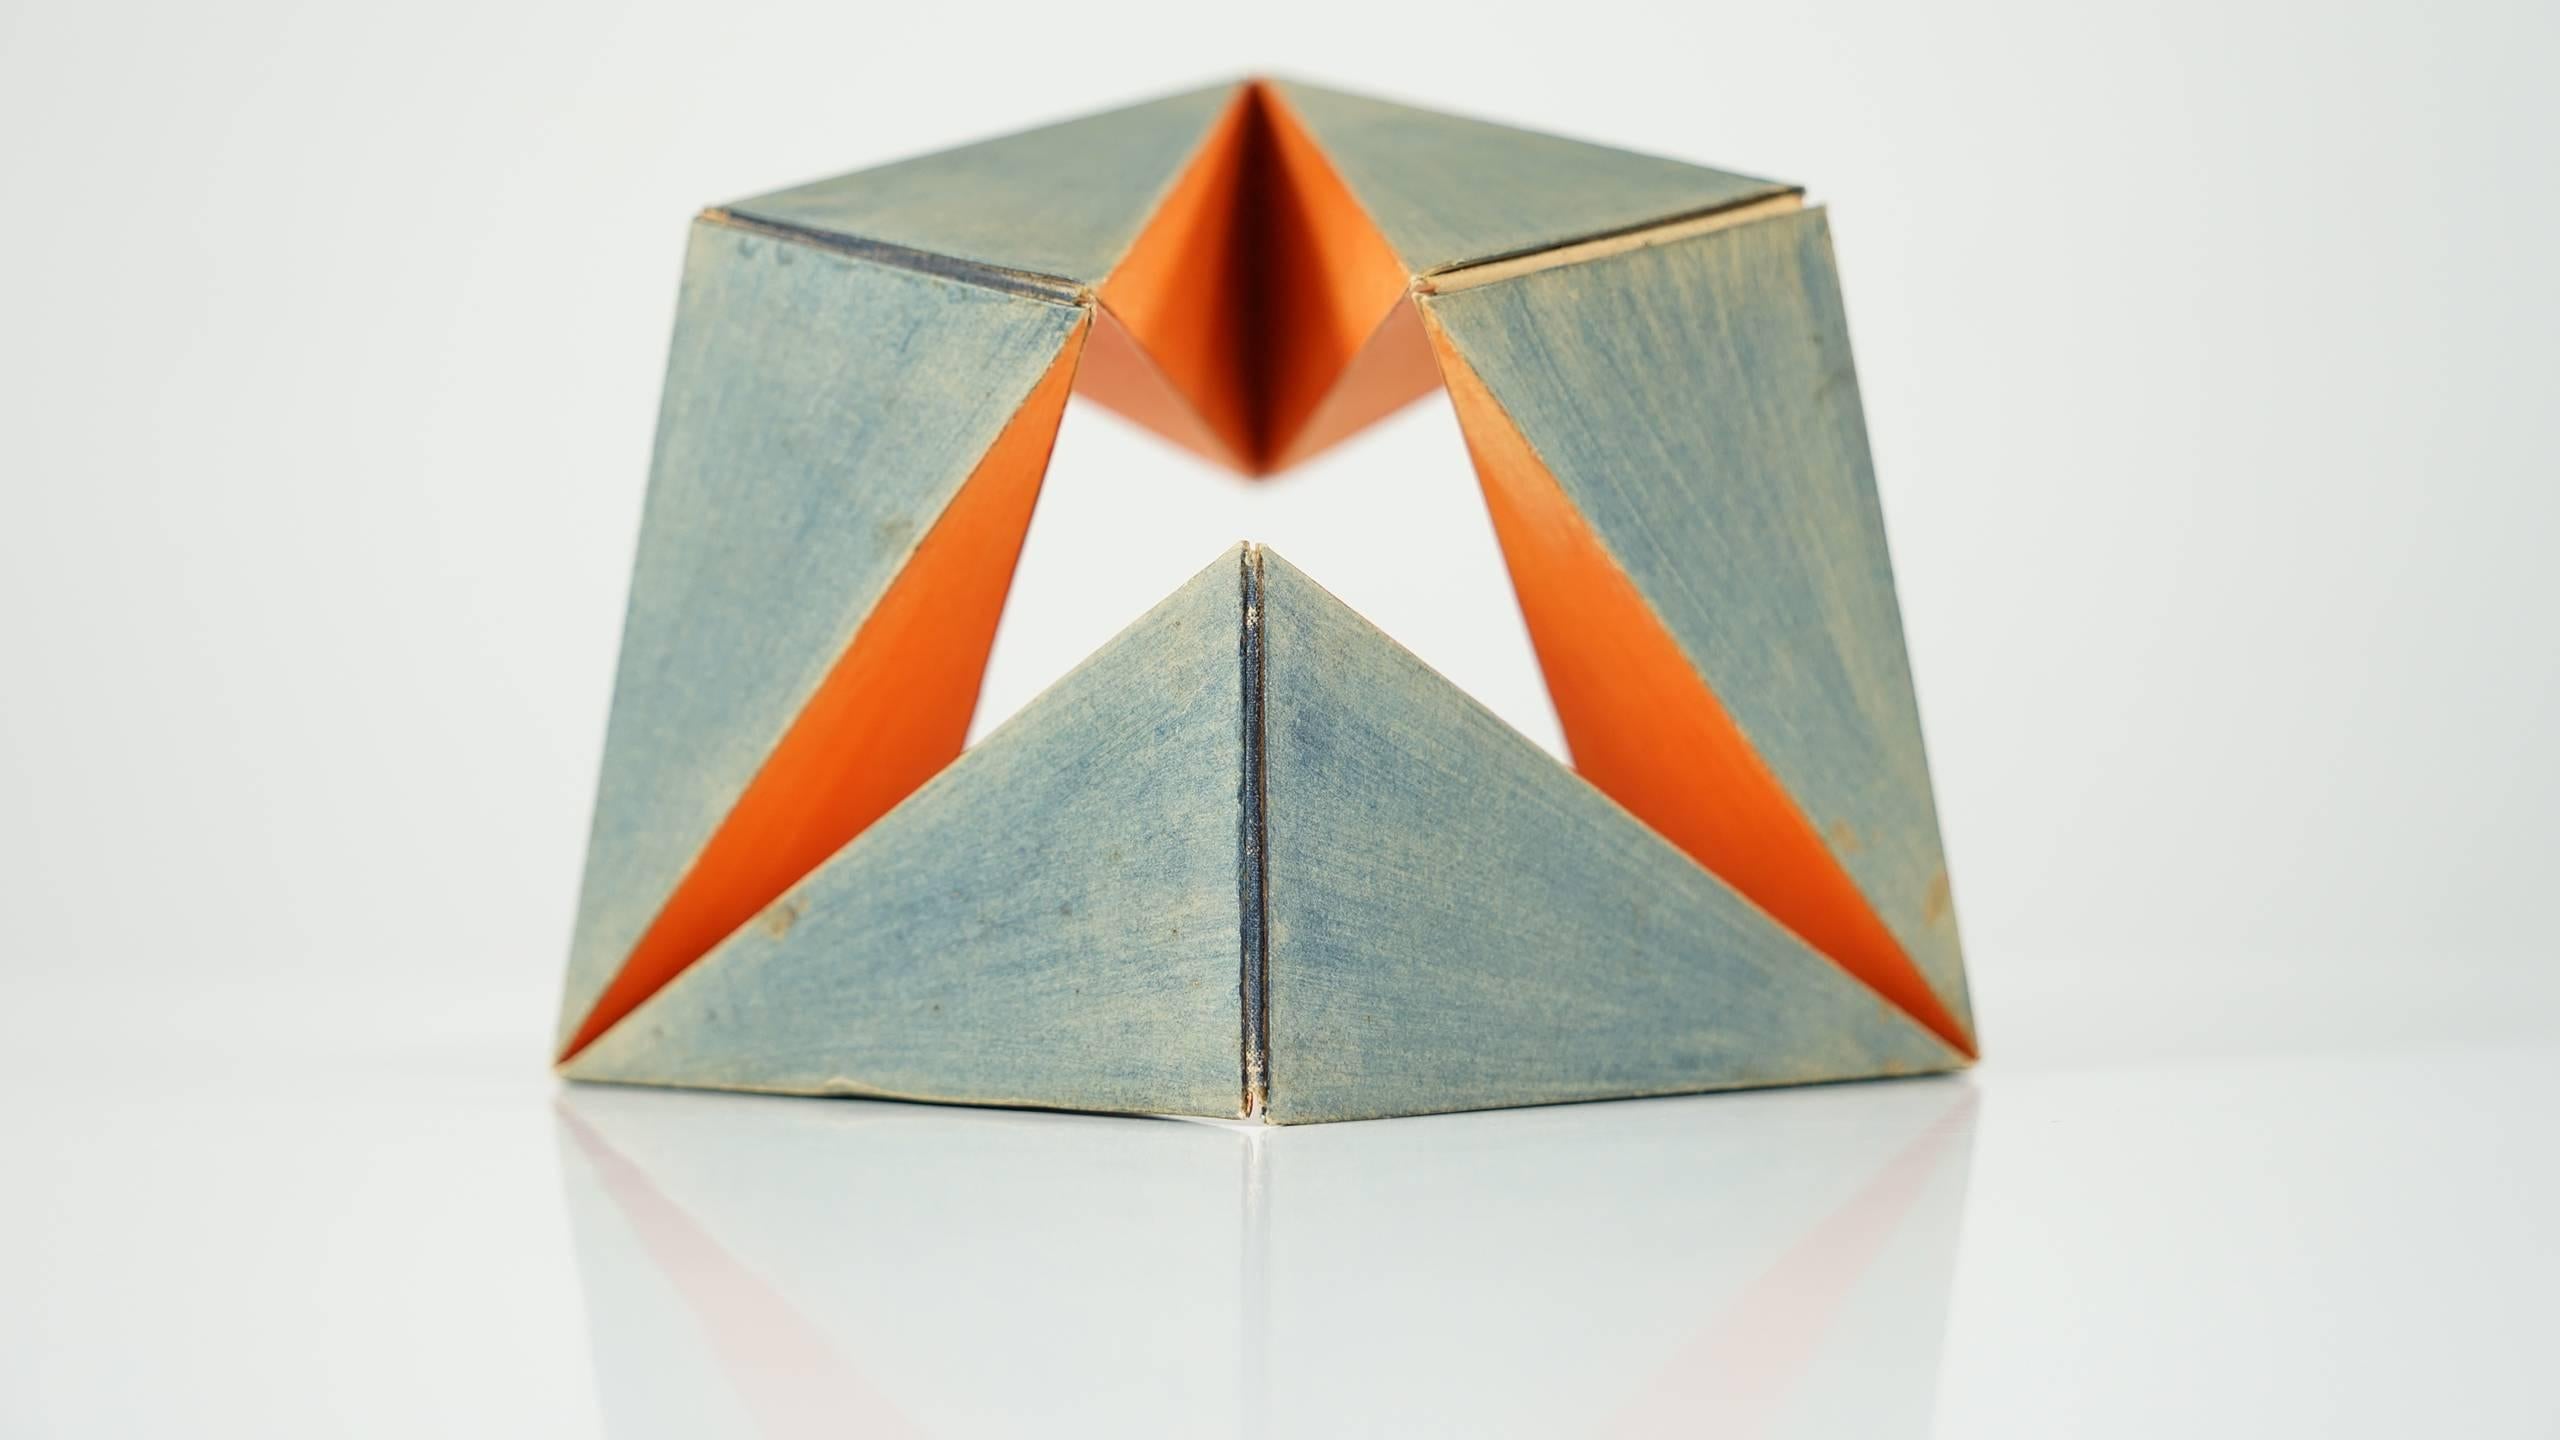 Paper Invertible Cube Signed, Colored and Handmade by Paul Schatz, 1898-1979 For Sale